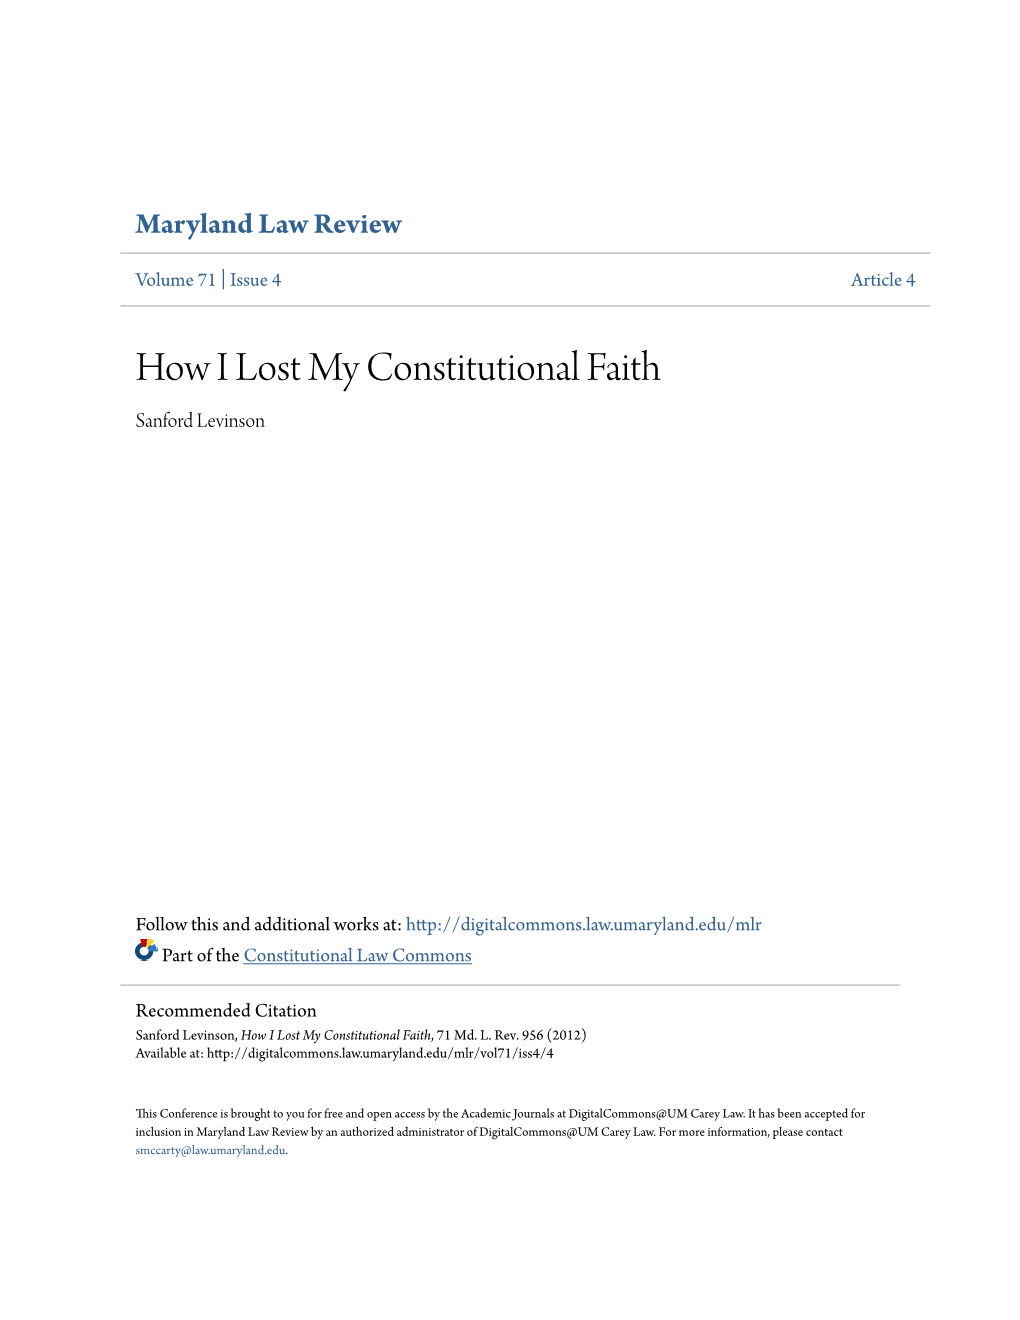 How I Lost My Constitutional Faith Sanford Levinson